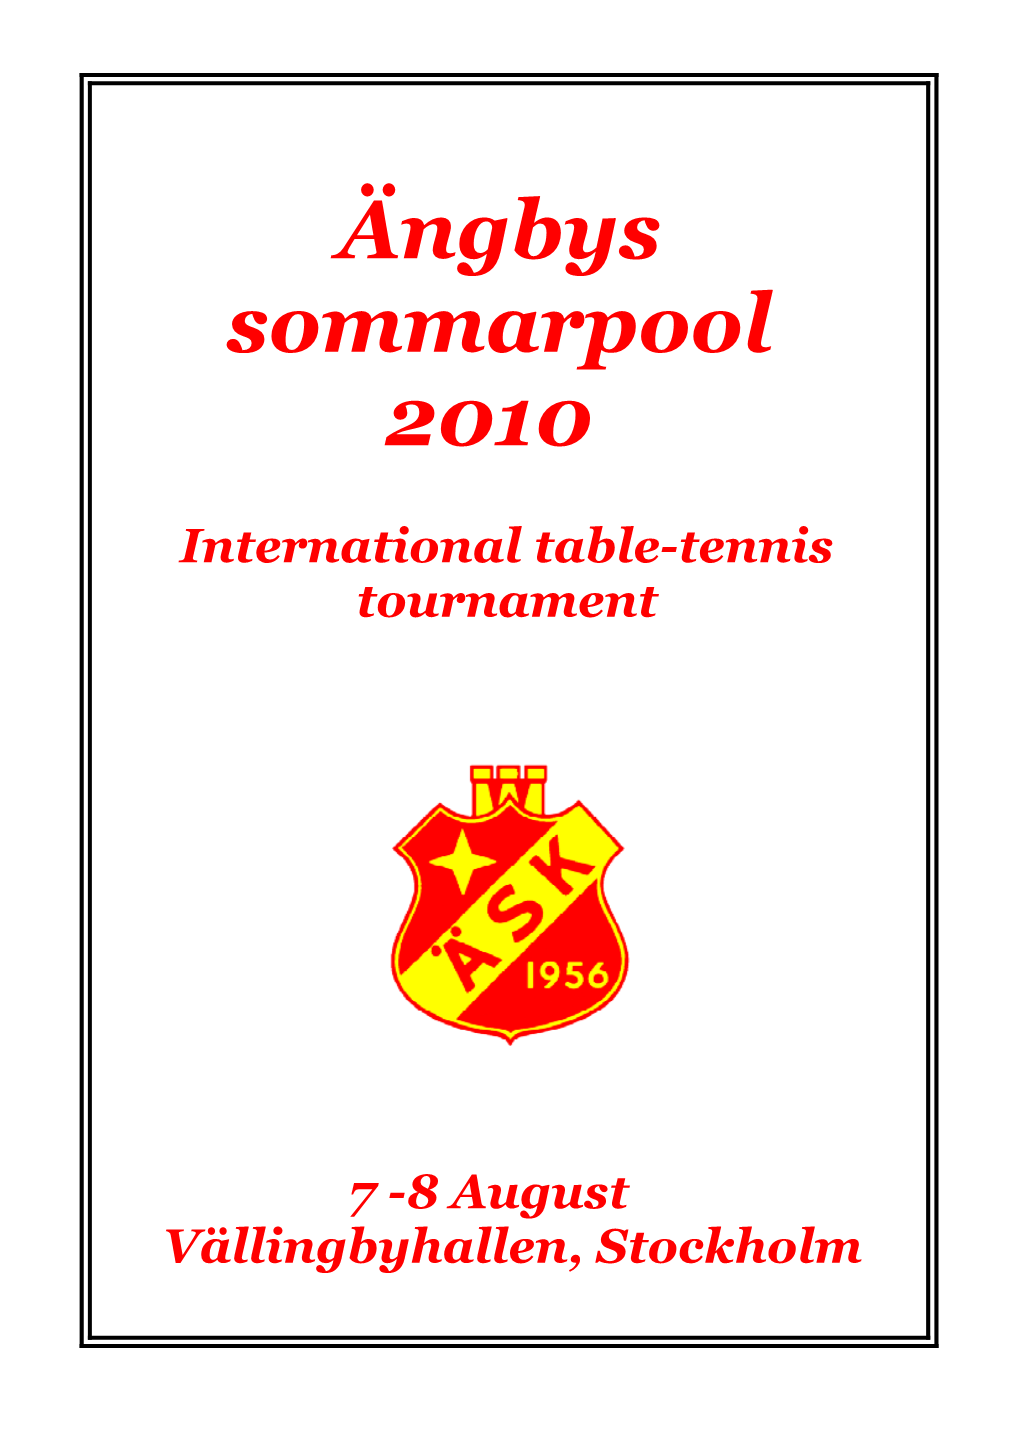 The Tournament Is Sanctioned by the Swedish Table-Tennis Association